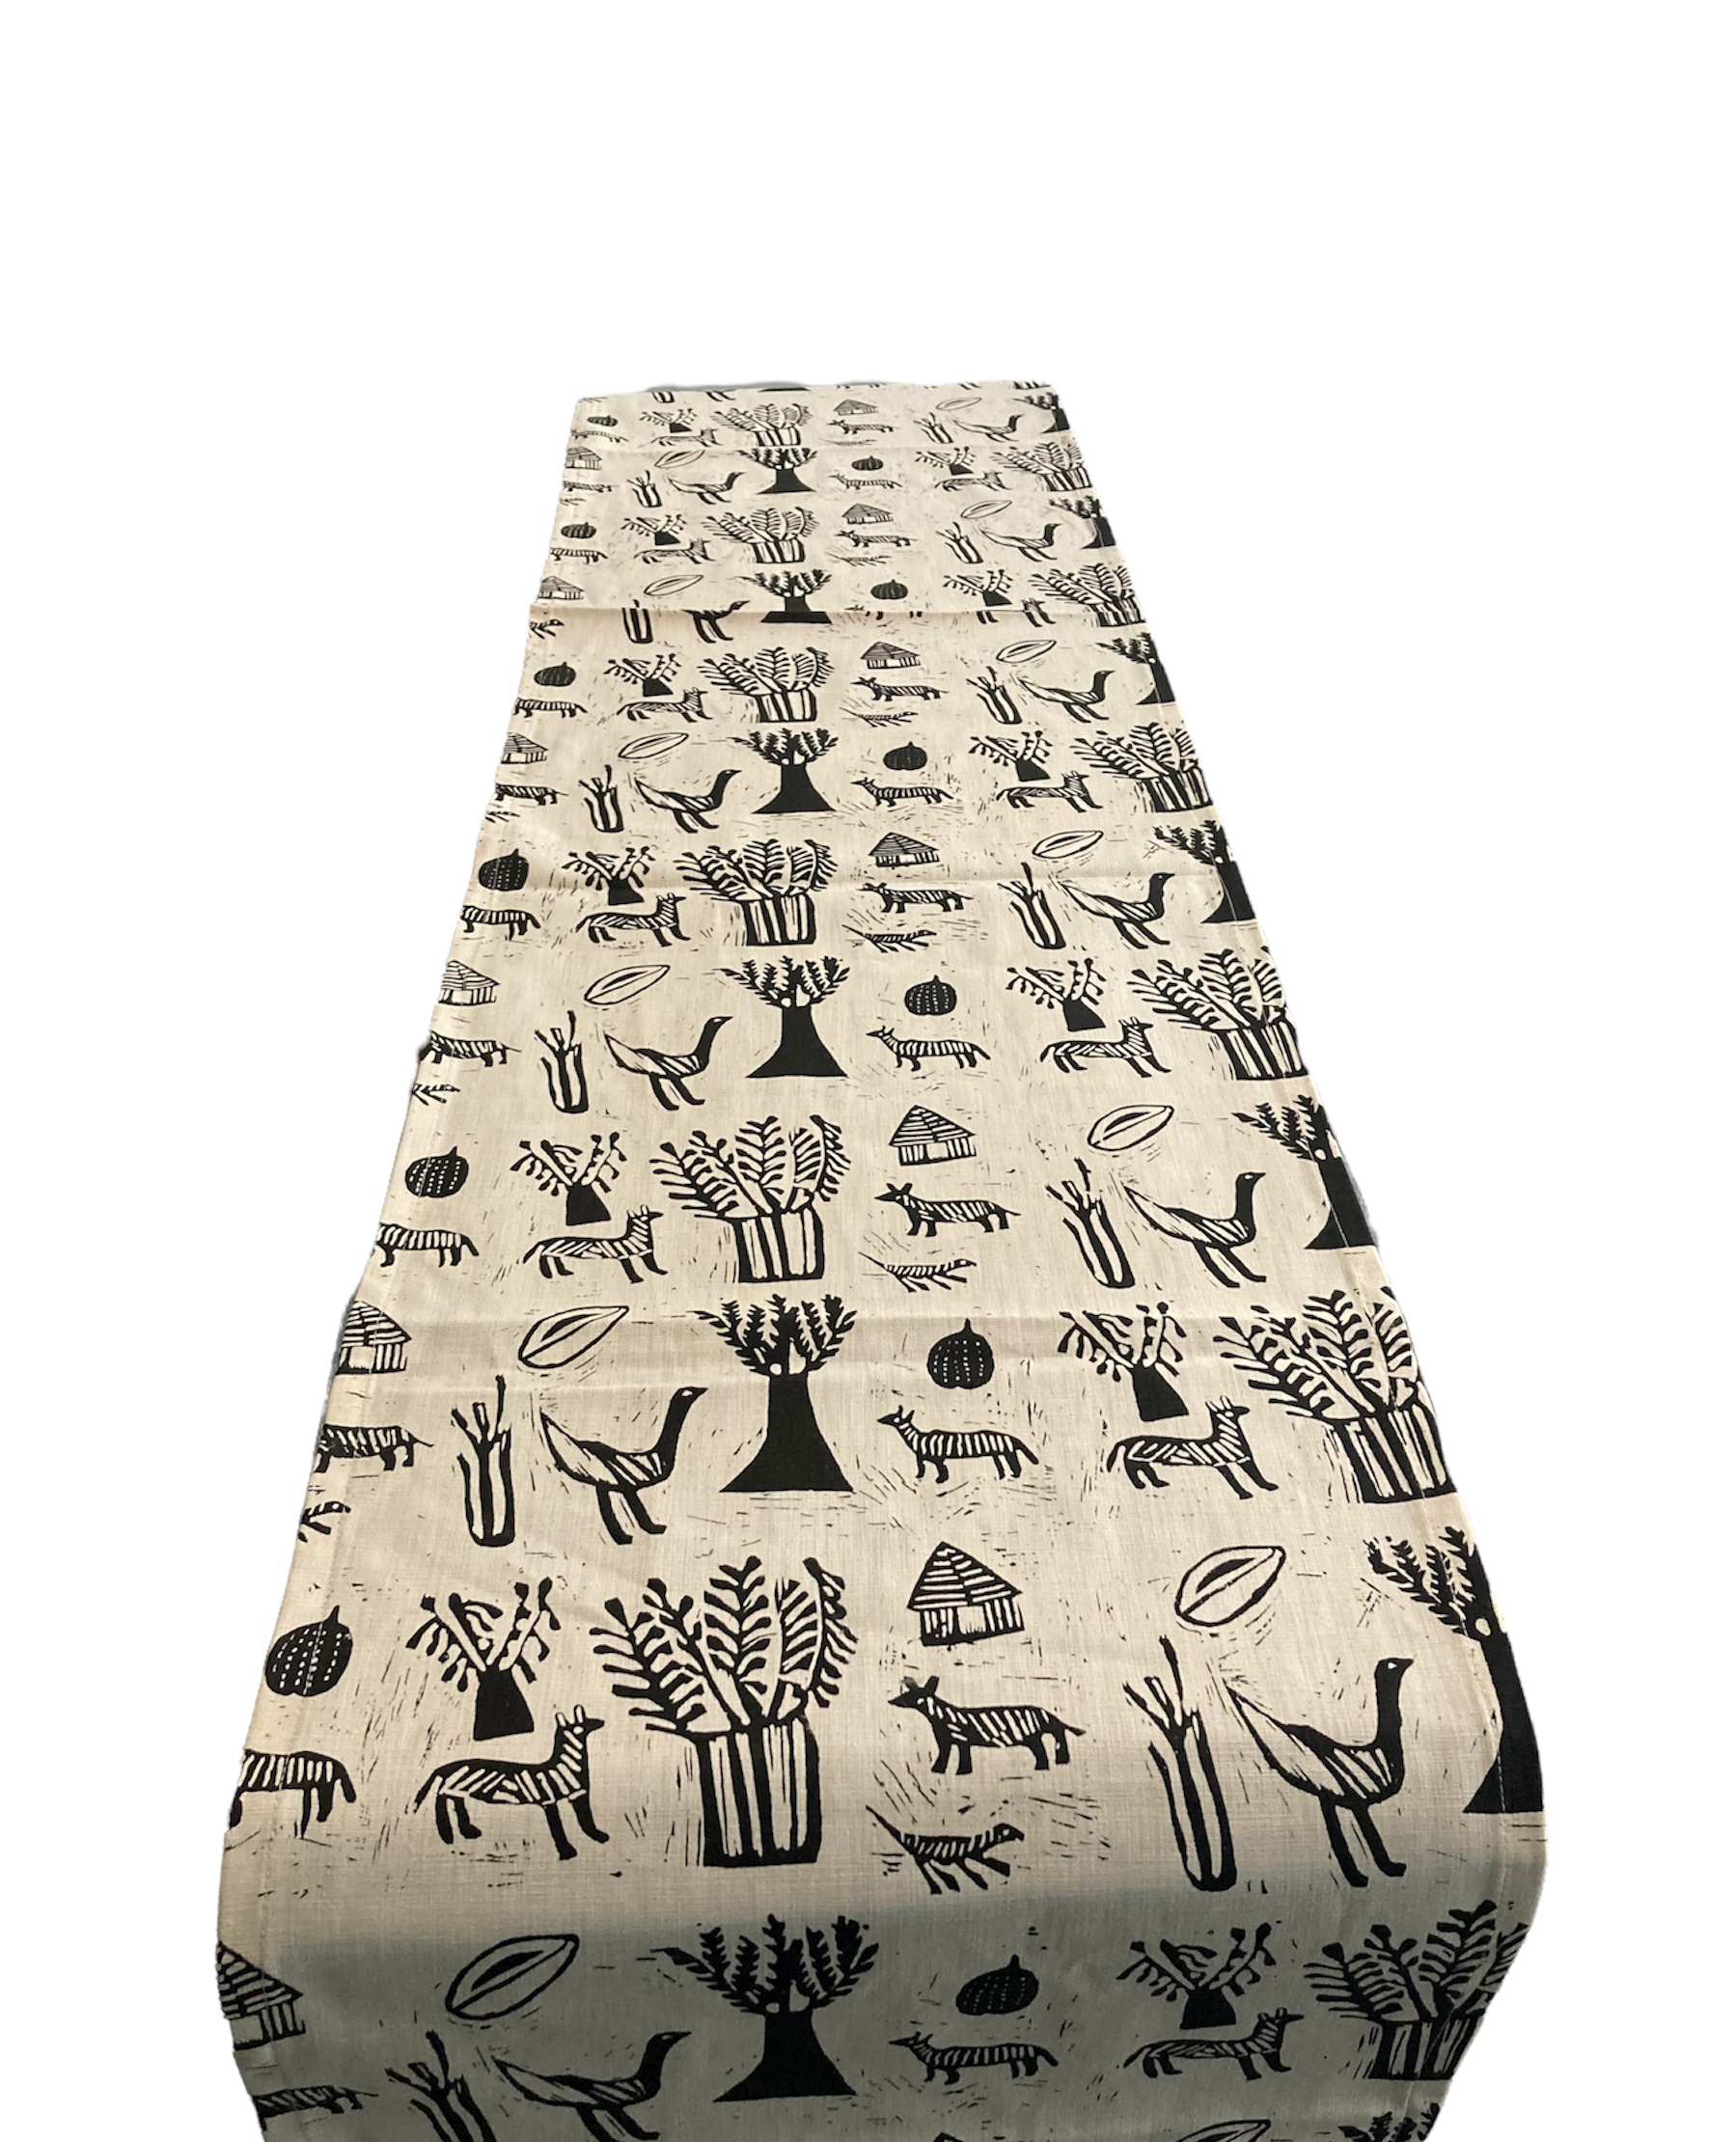 100% cotton Table Runner 96\" x 16\" from Namibia - Design bw06l